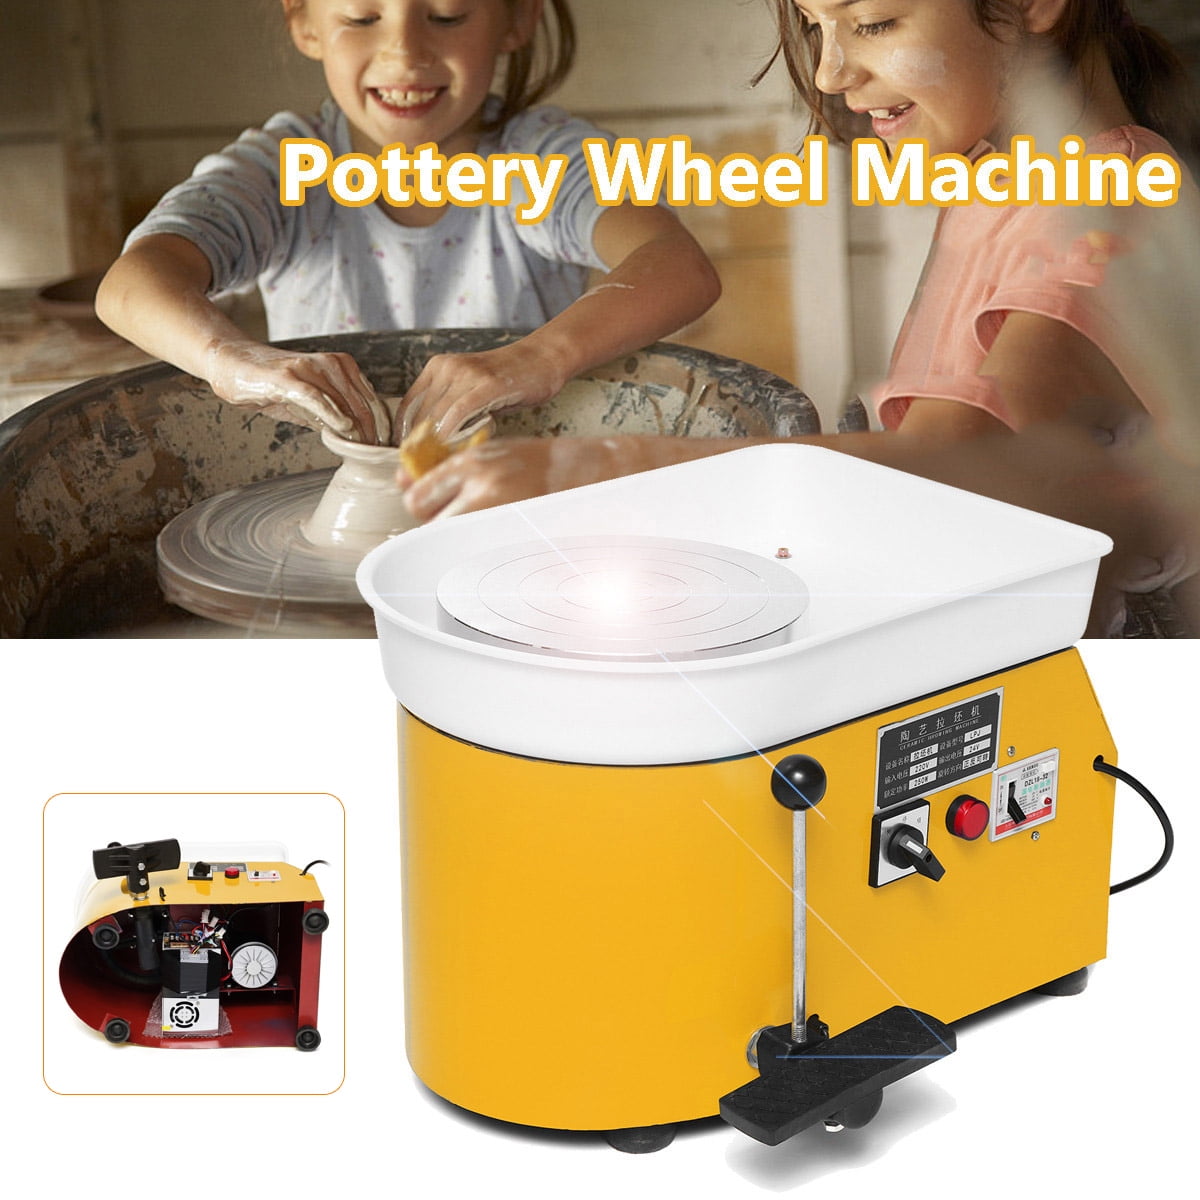 Blue Pottery Wheel SEAAN 25CM 350W Electric Pottery Wheel Machine Ceramic Work Pottery Ceramic Forming Machine DIY Clay Art Craft with Foot Pedal for Home Indoor